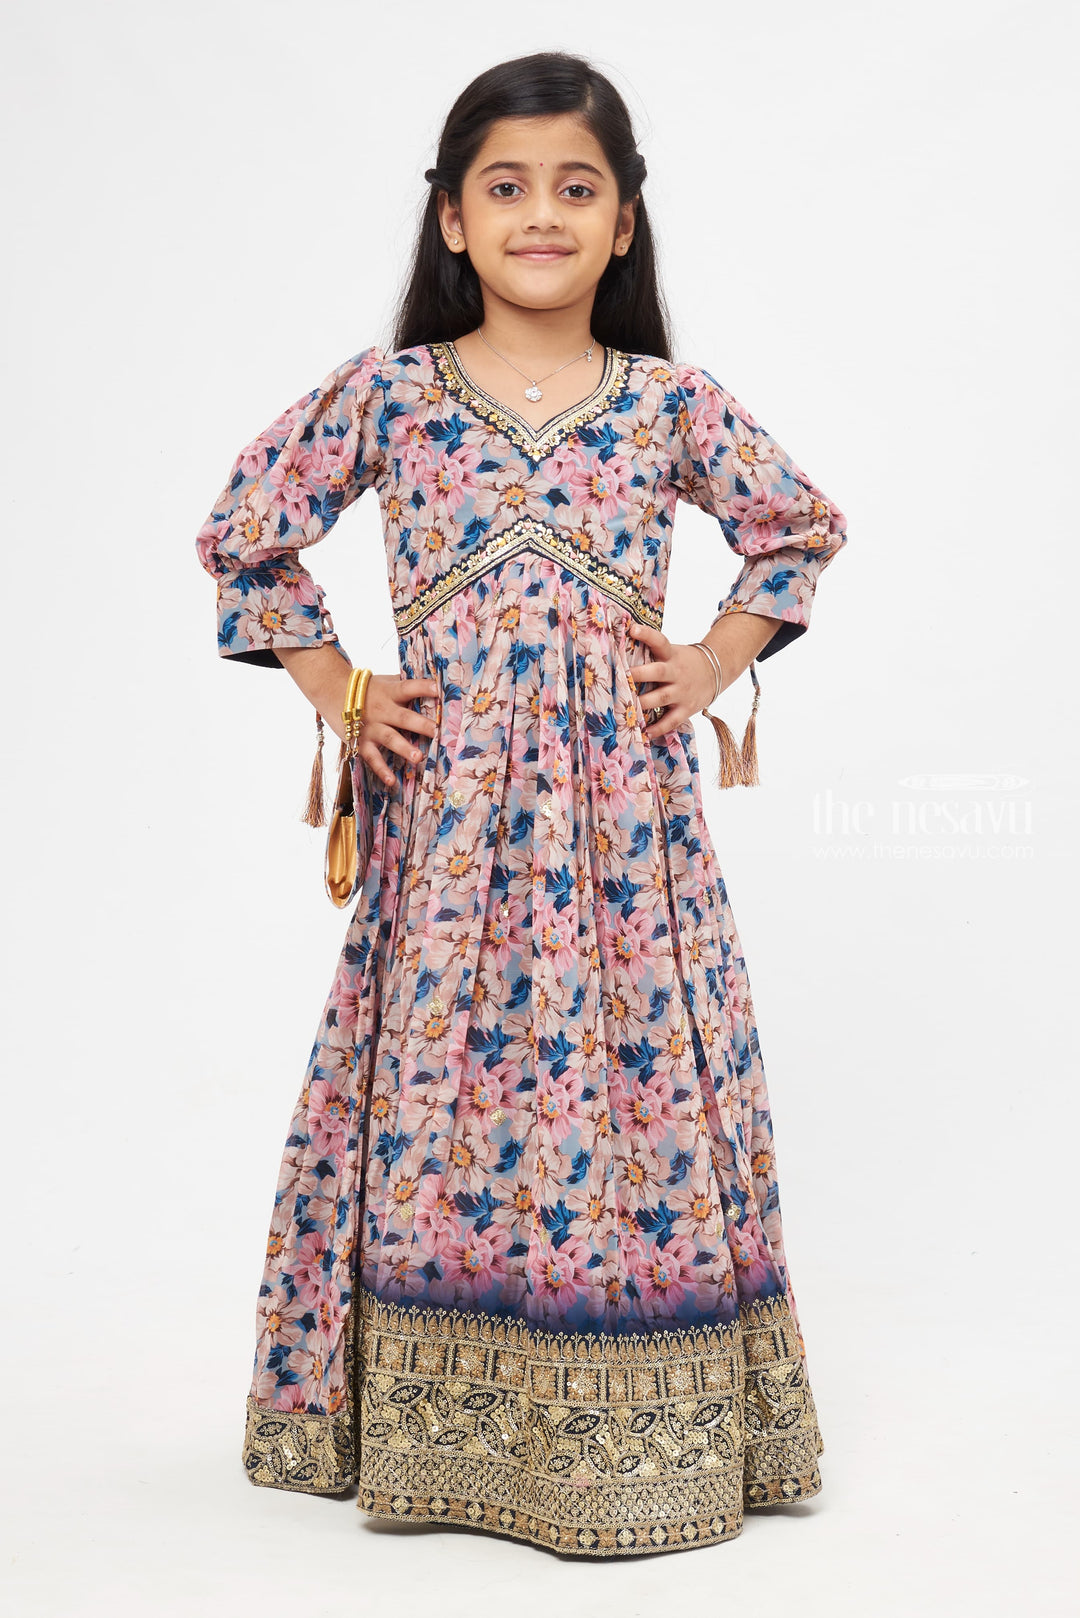 The Nesavu Girls Party Gown Ethereal Floral Diwali Anarkali Gown with Exquisite Sequin Embellishments for Girls Nesavu 16 (1Y) / Pink / Organza Printed GA173A-16 Pastel Floral Designer Anarkali Gown | Diwali Special Girls Festive Collection | The Nesavu